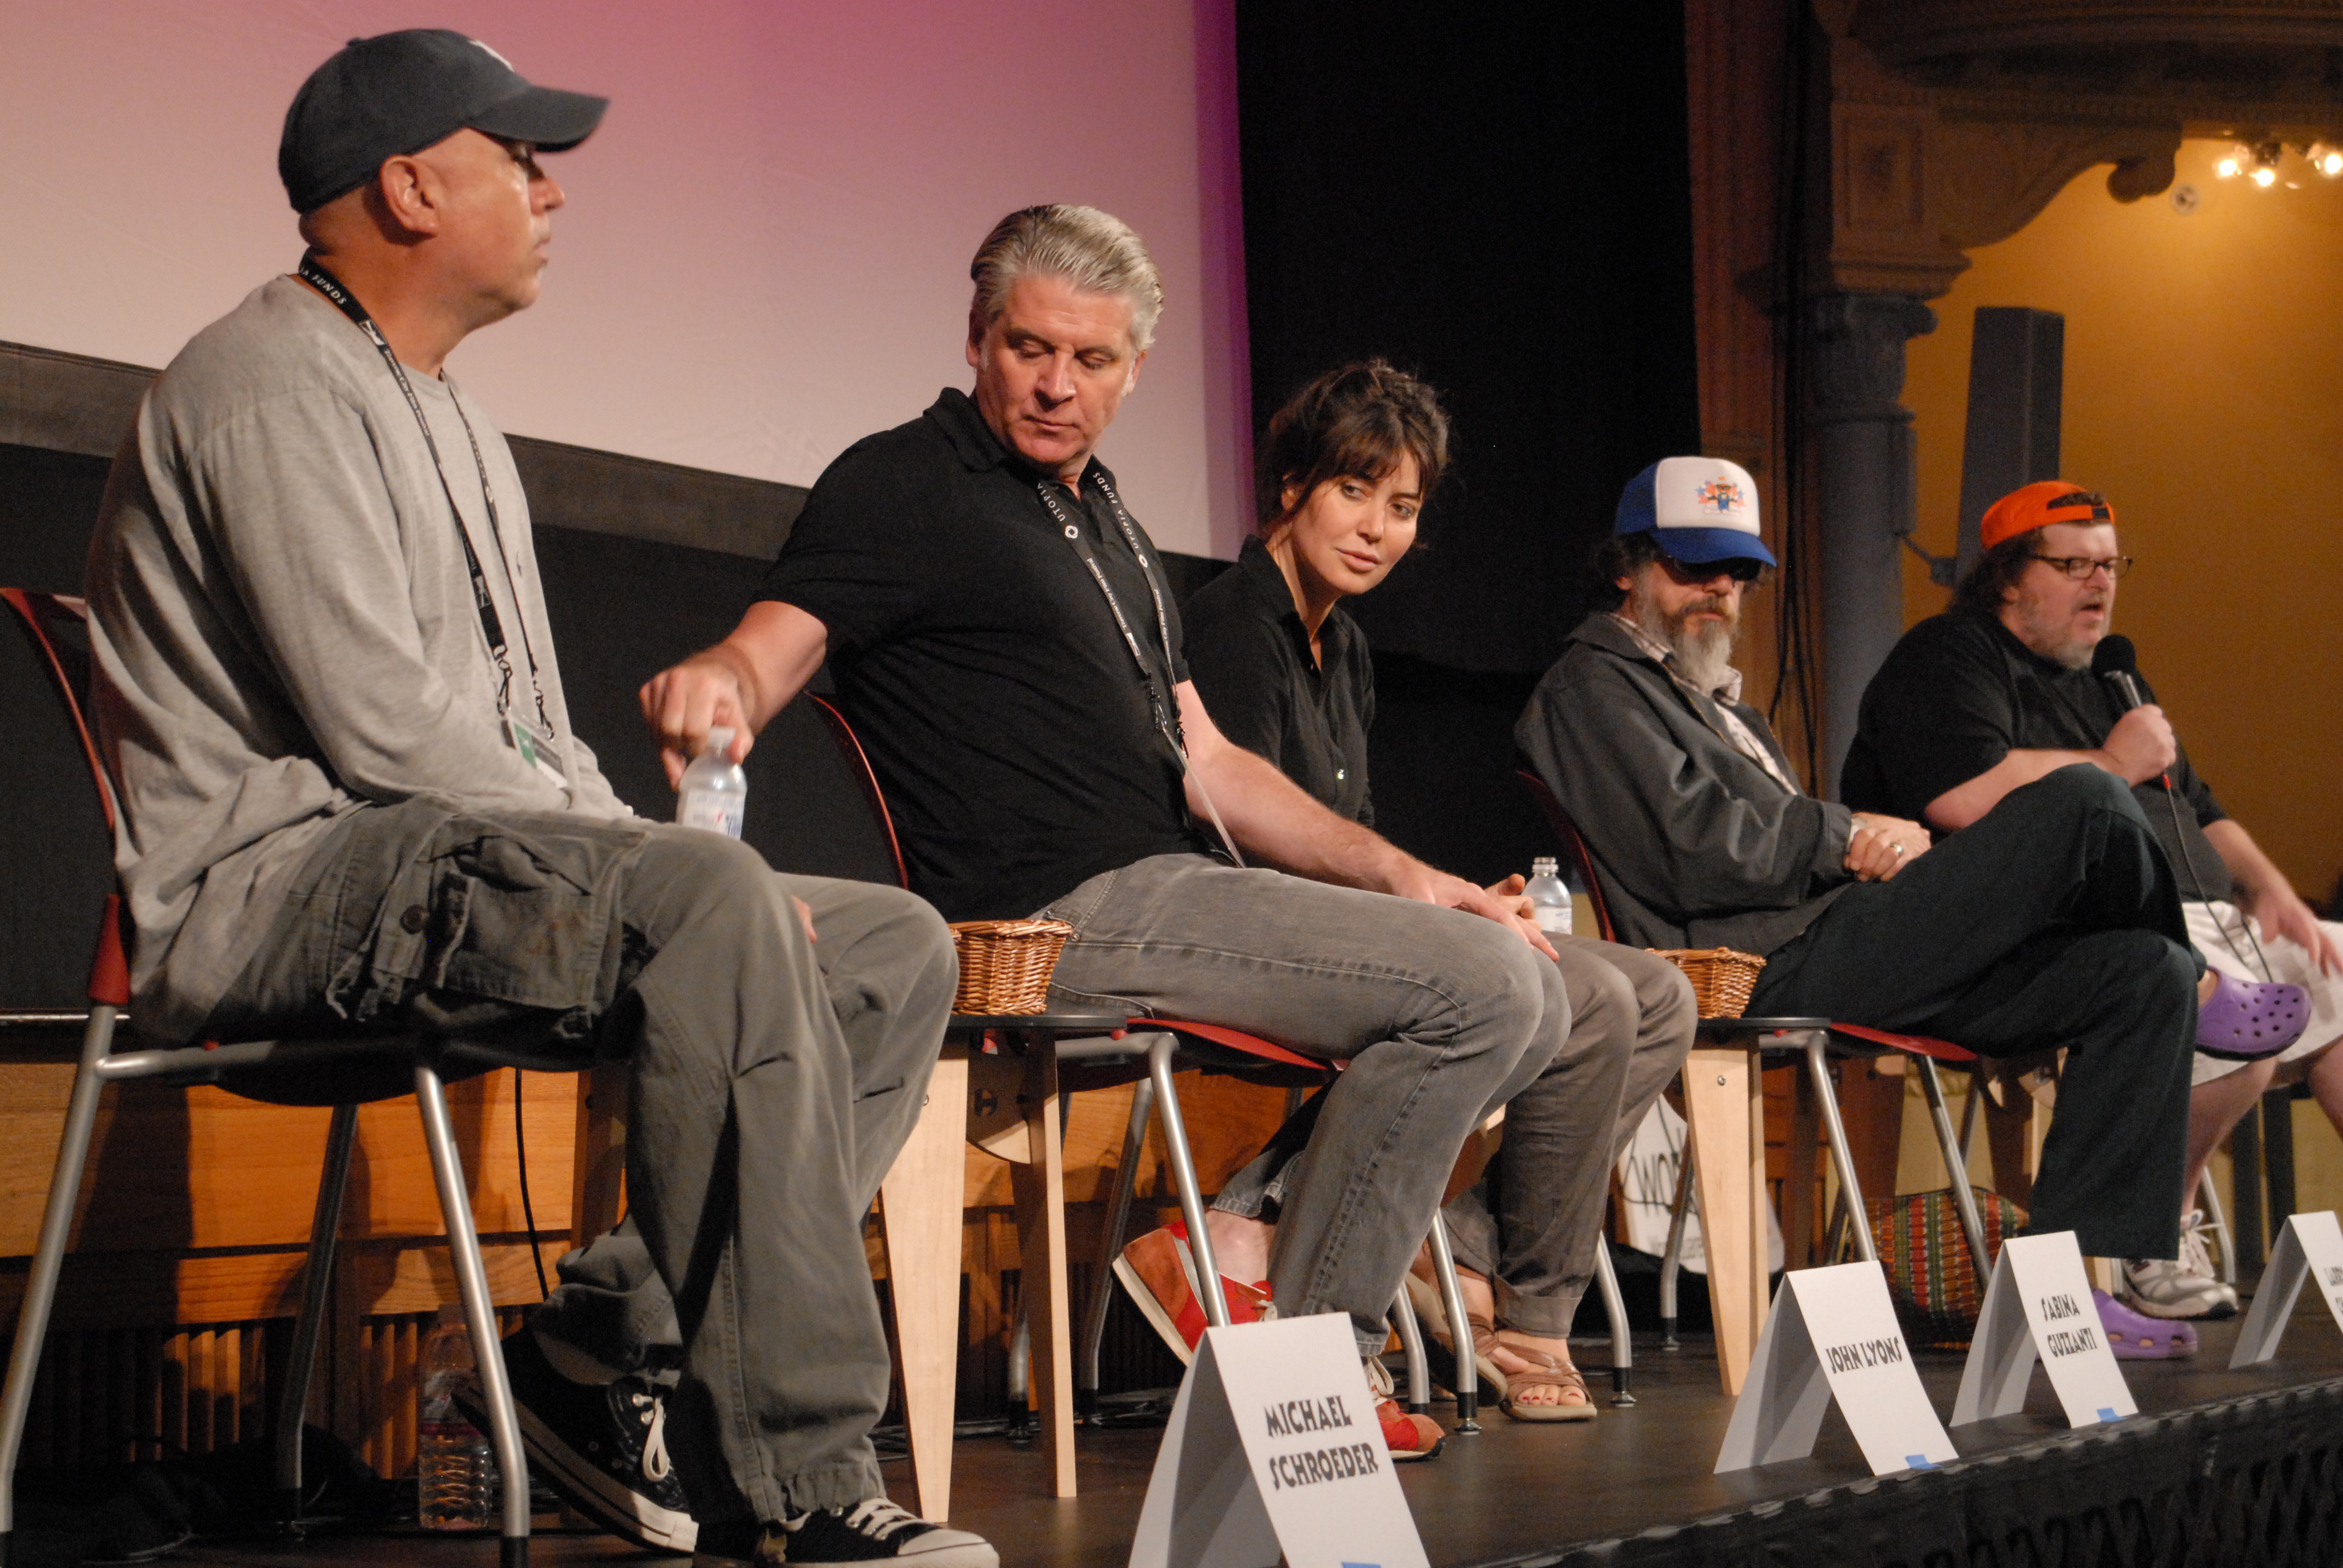 Schroeder with John Lyons (Focus Features), Larry Charles (Barat, Religulous) and Michael Moore on a Comedy Panel at the 2008 Traverse City Film Festival.